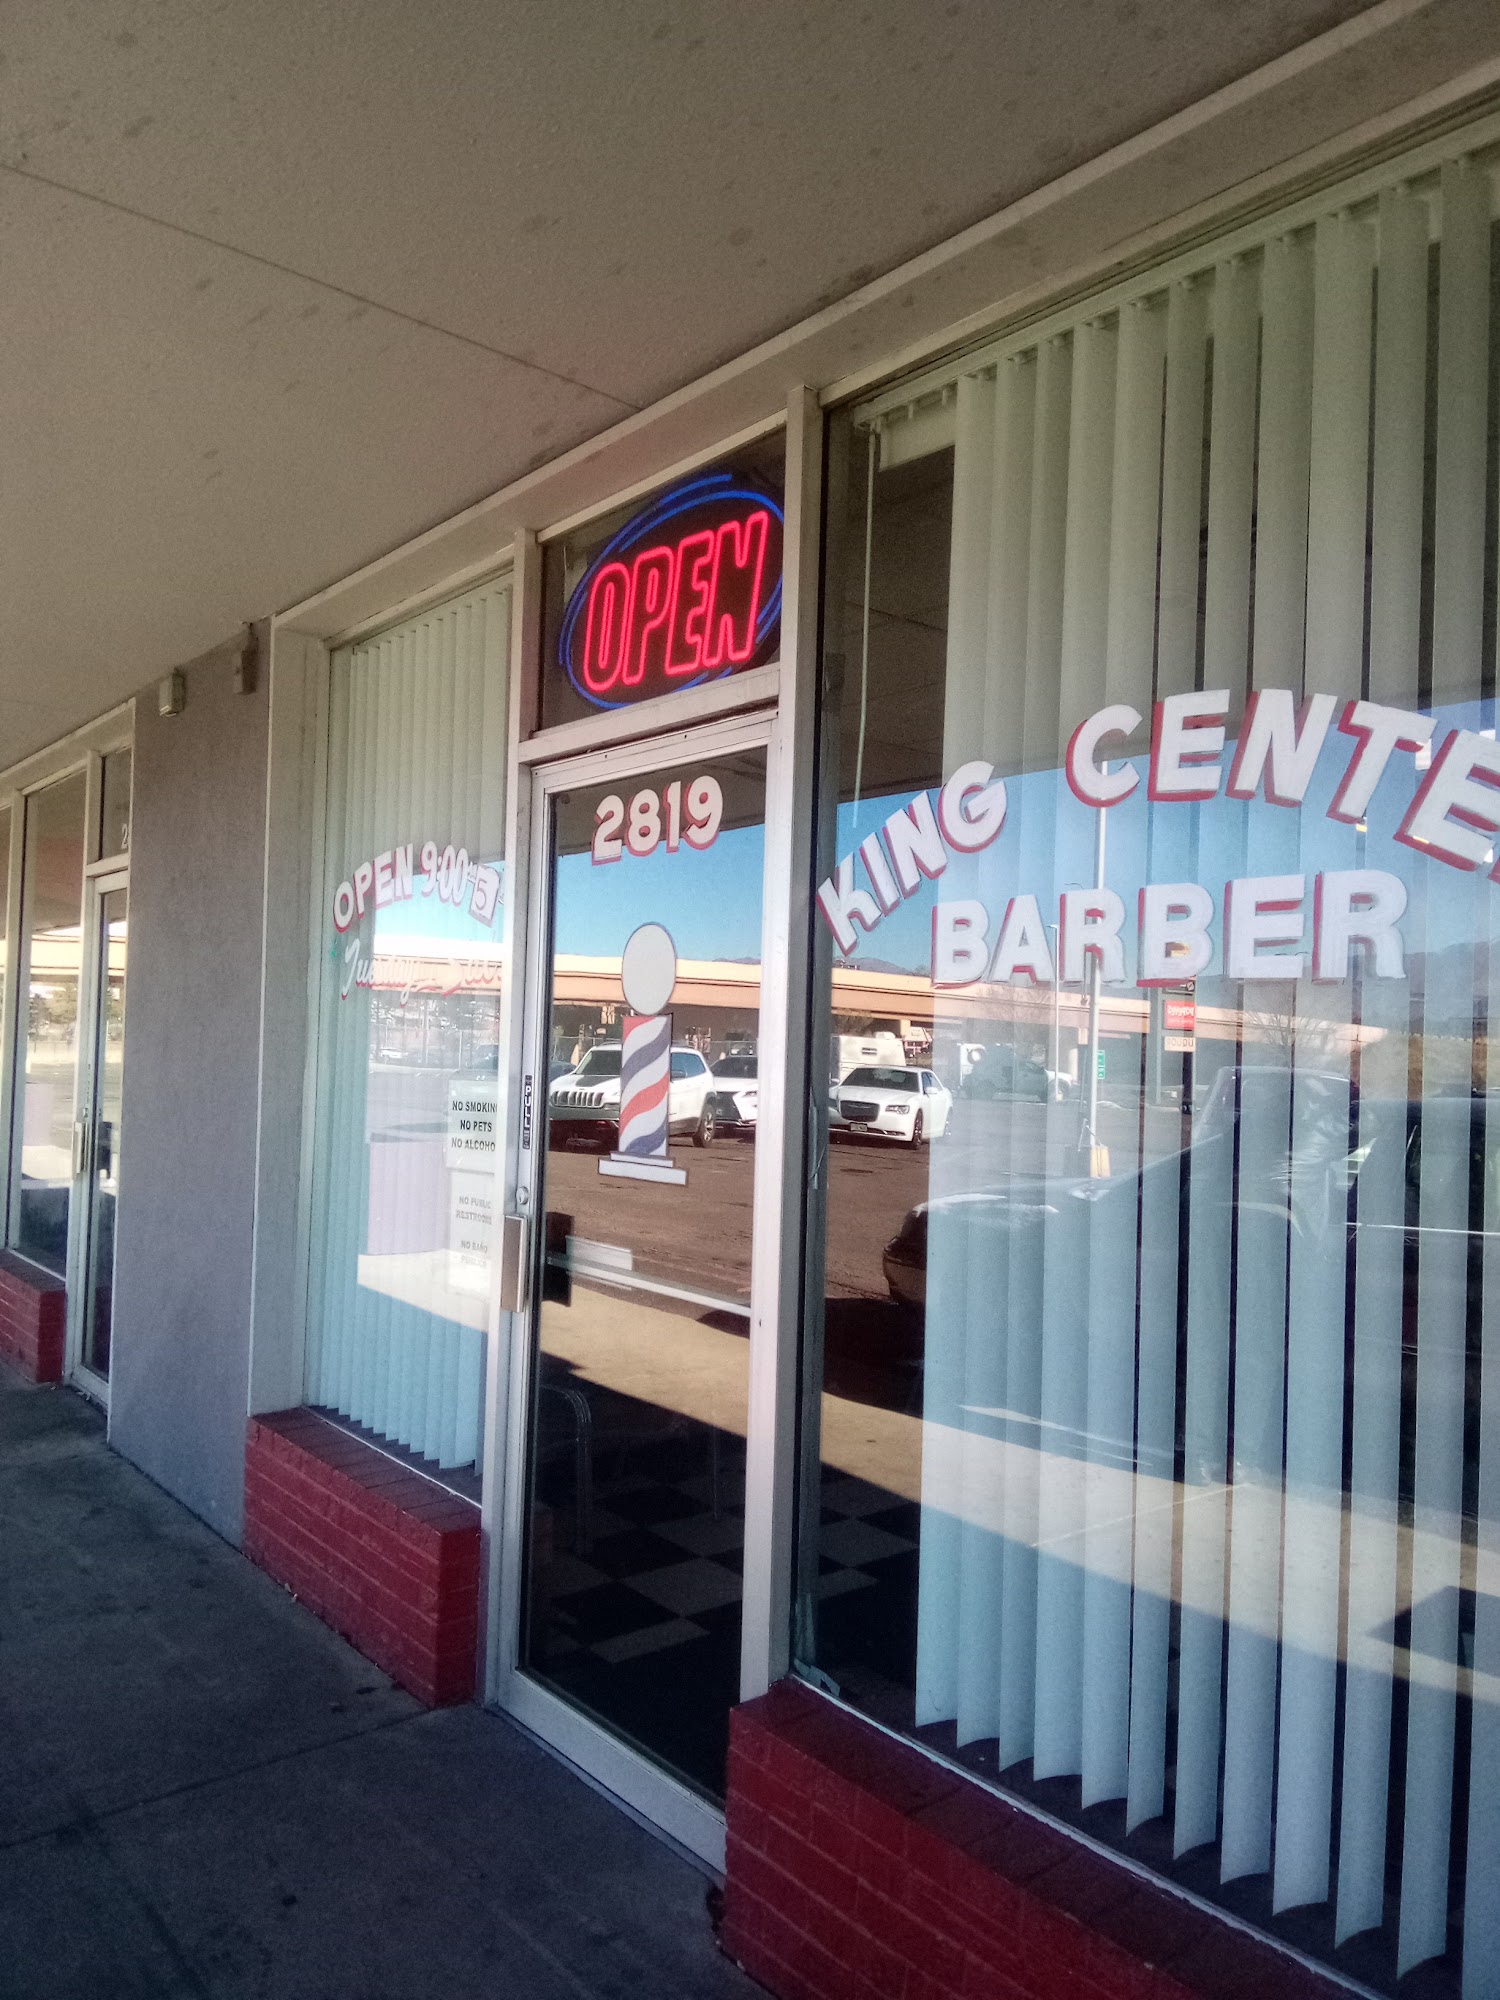 King Center Barbers